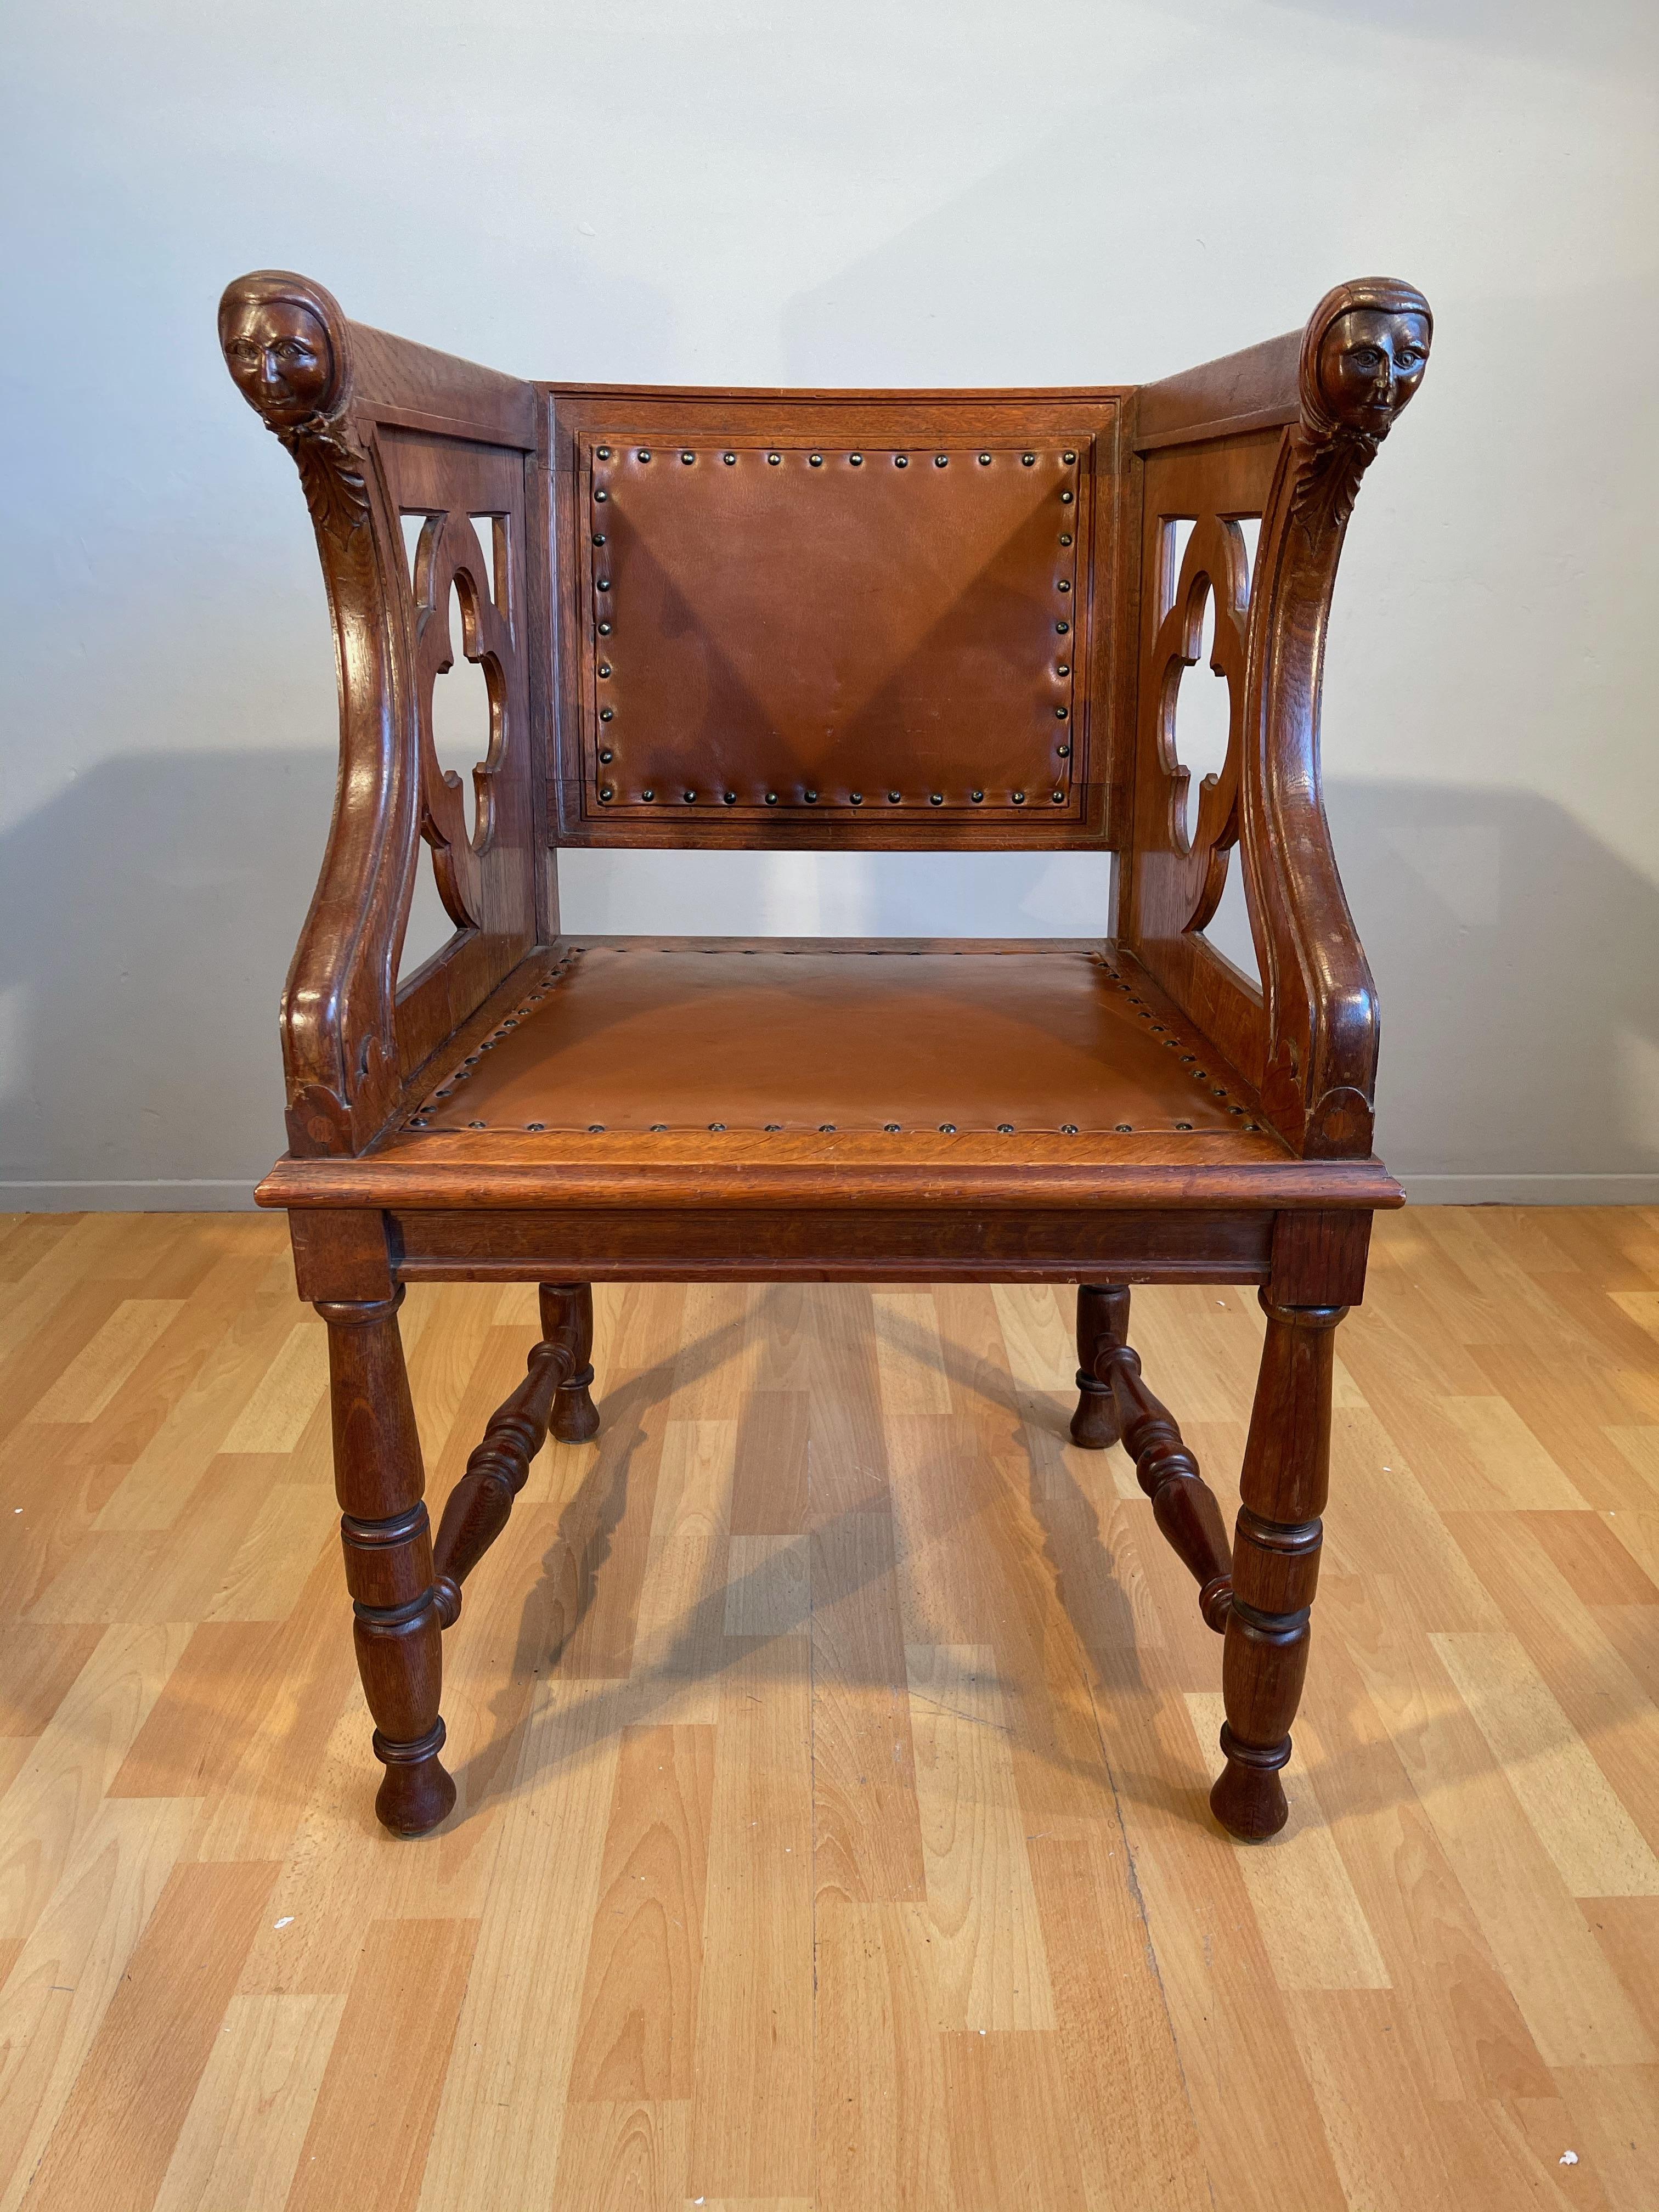 Unique and impressive, Gothic style chair from the late 1800s. 

This rare and solid oak Gothic Revival church chair has a beautiful patination and it is as stabile as the day it was made. The woodwork is in good to excellent condition and this